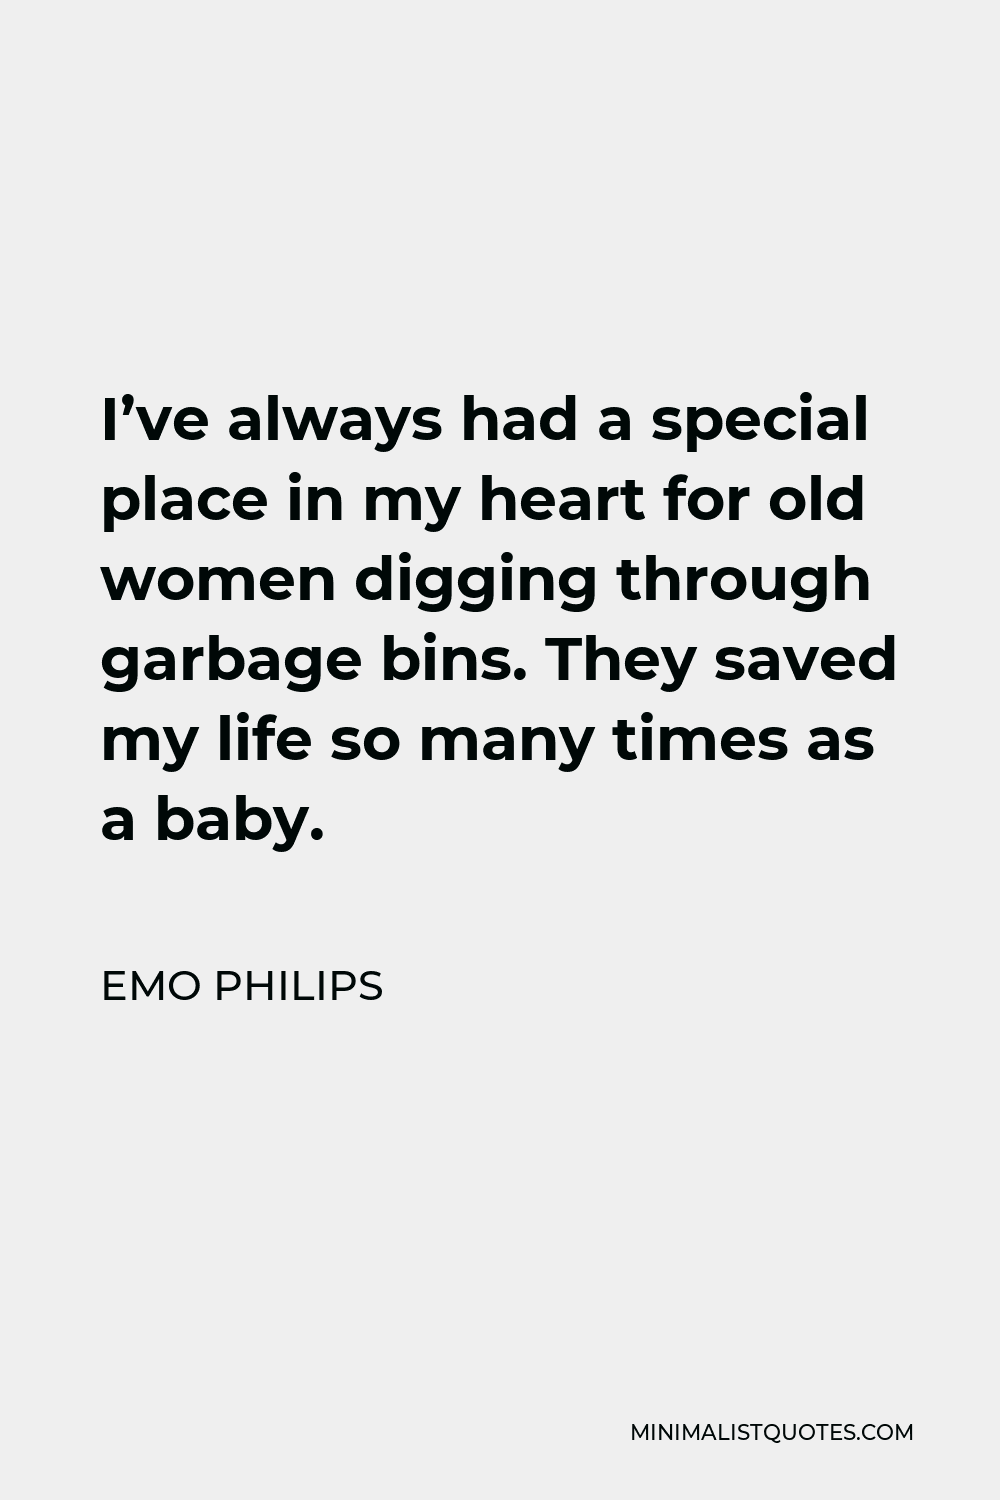 Emo Philips Quote - I’ve always had a special place in my heart for old women digging through garbage bins. They saved my life so many times as a baby.